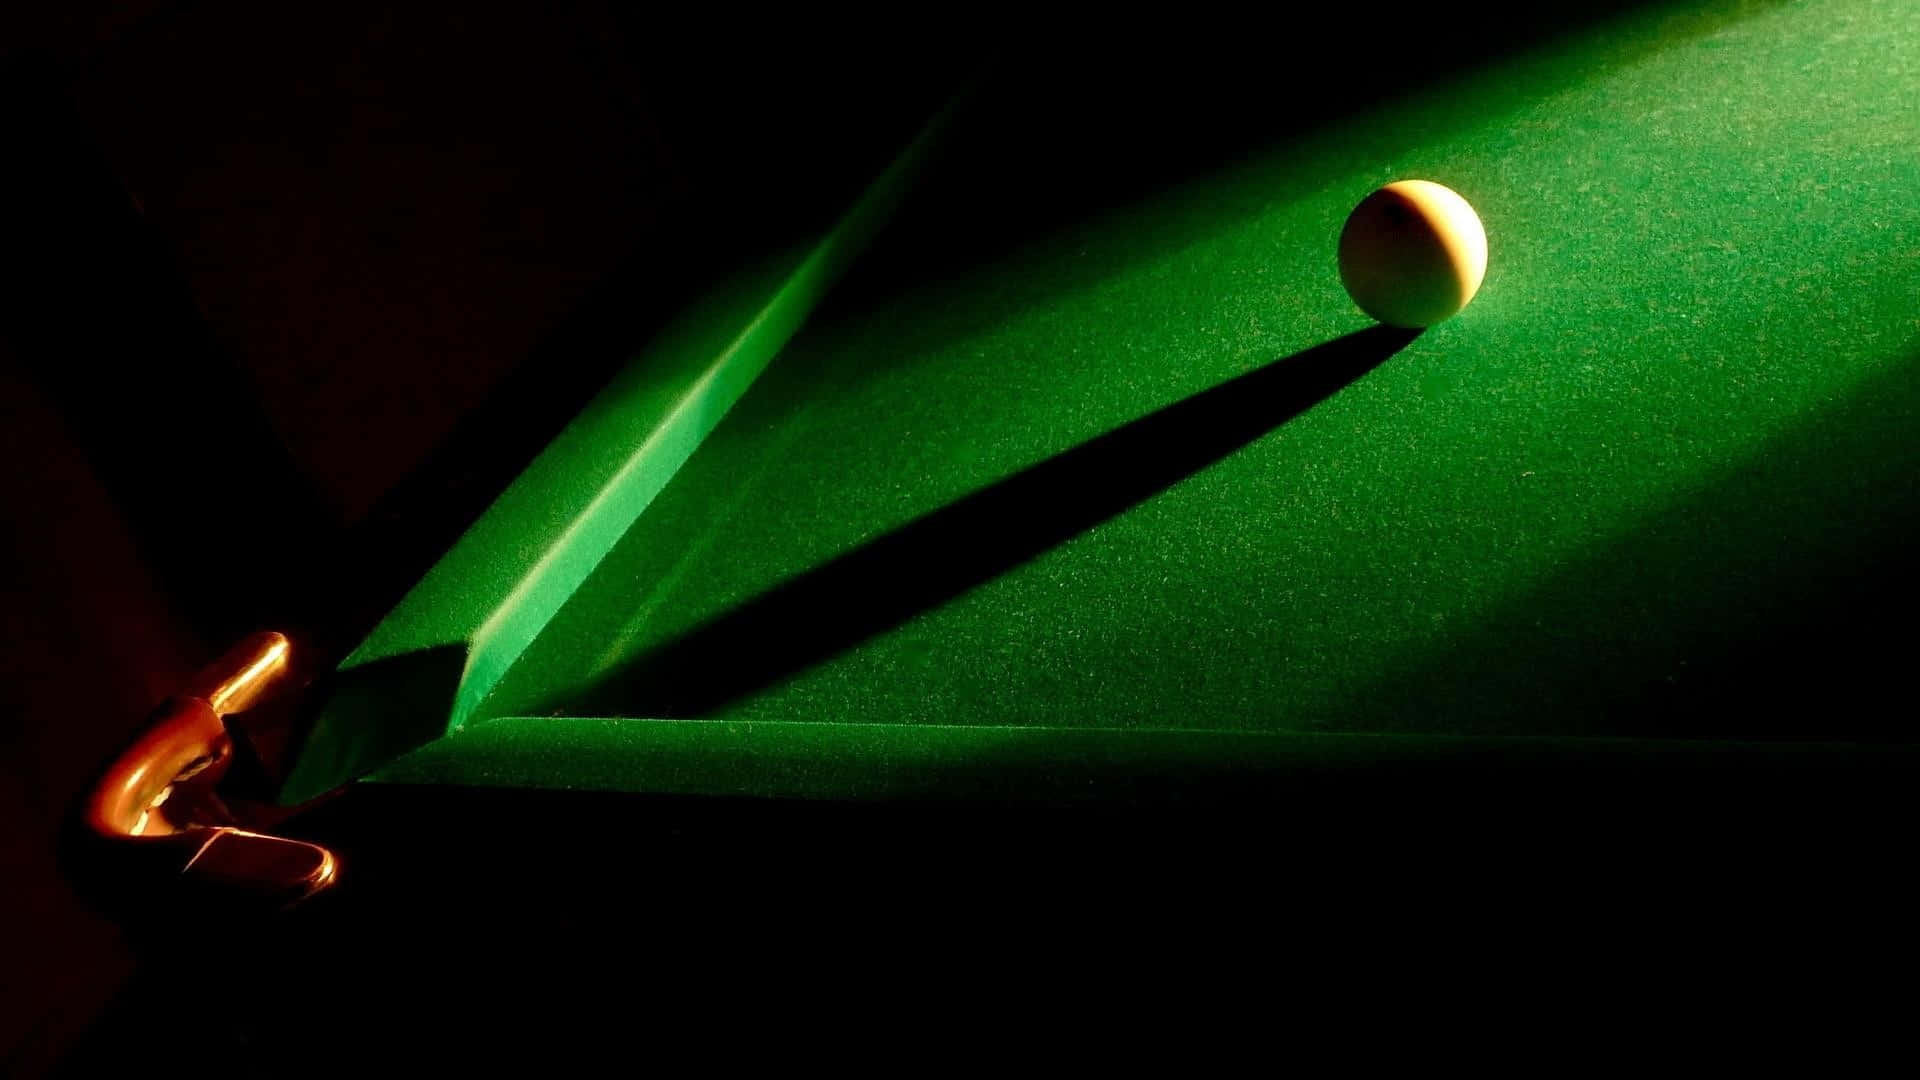 One Ball on Pool Table Wallpaper